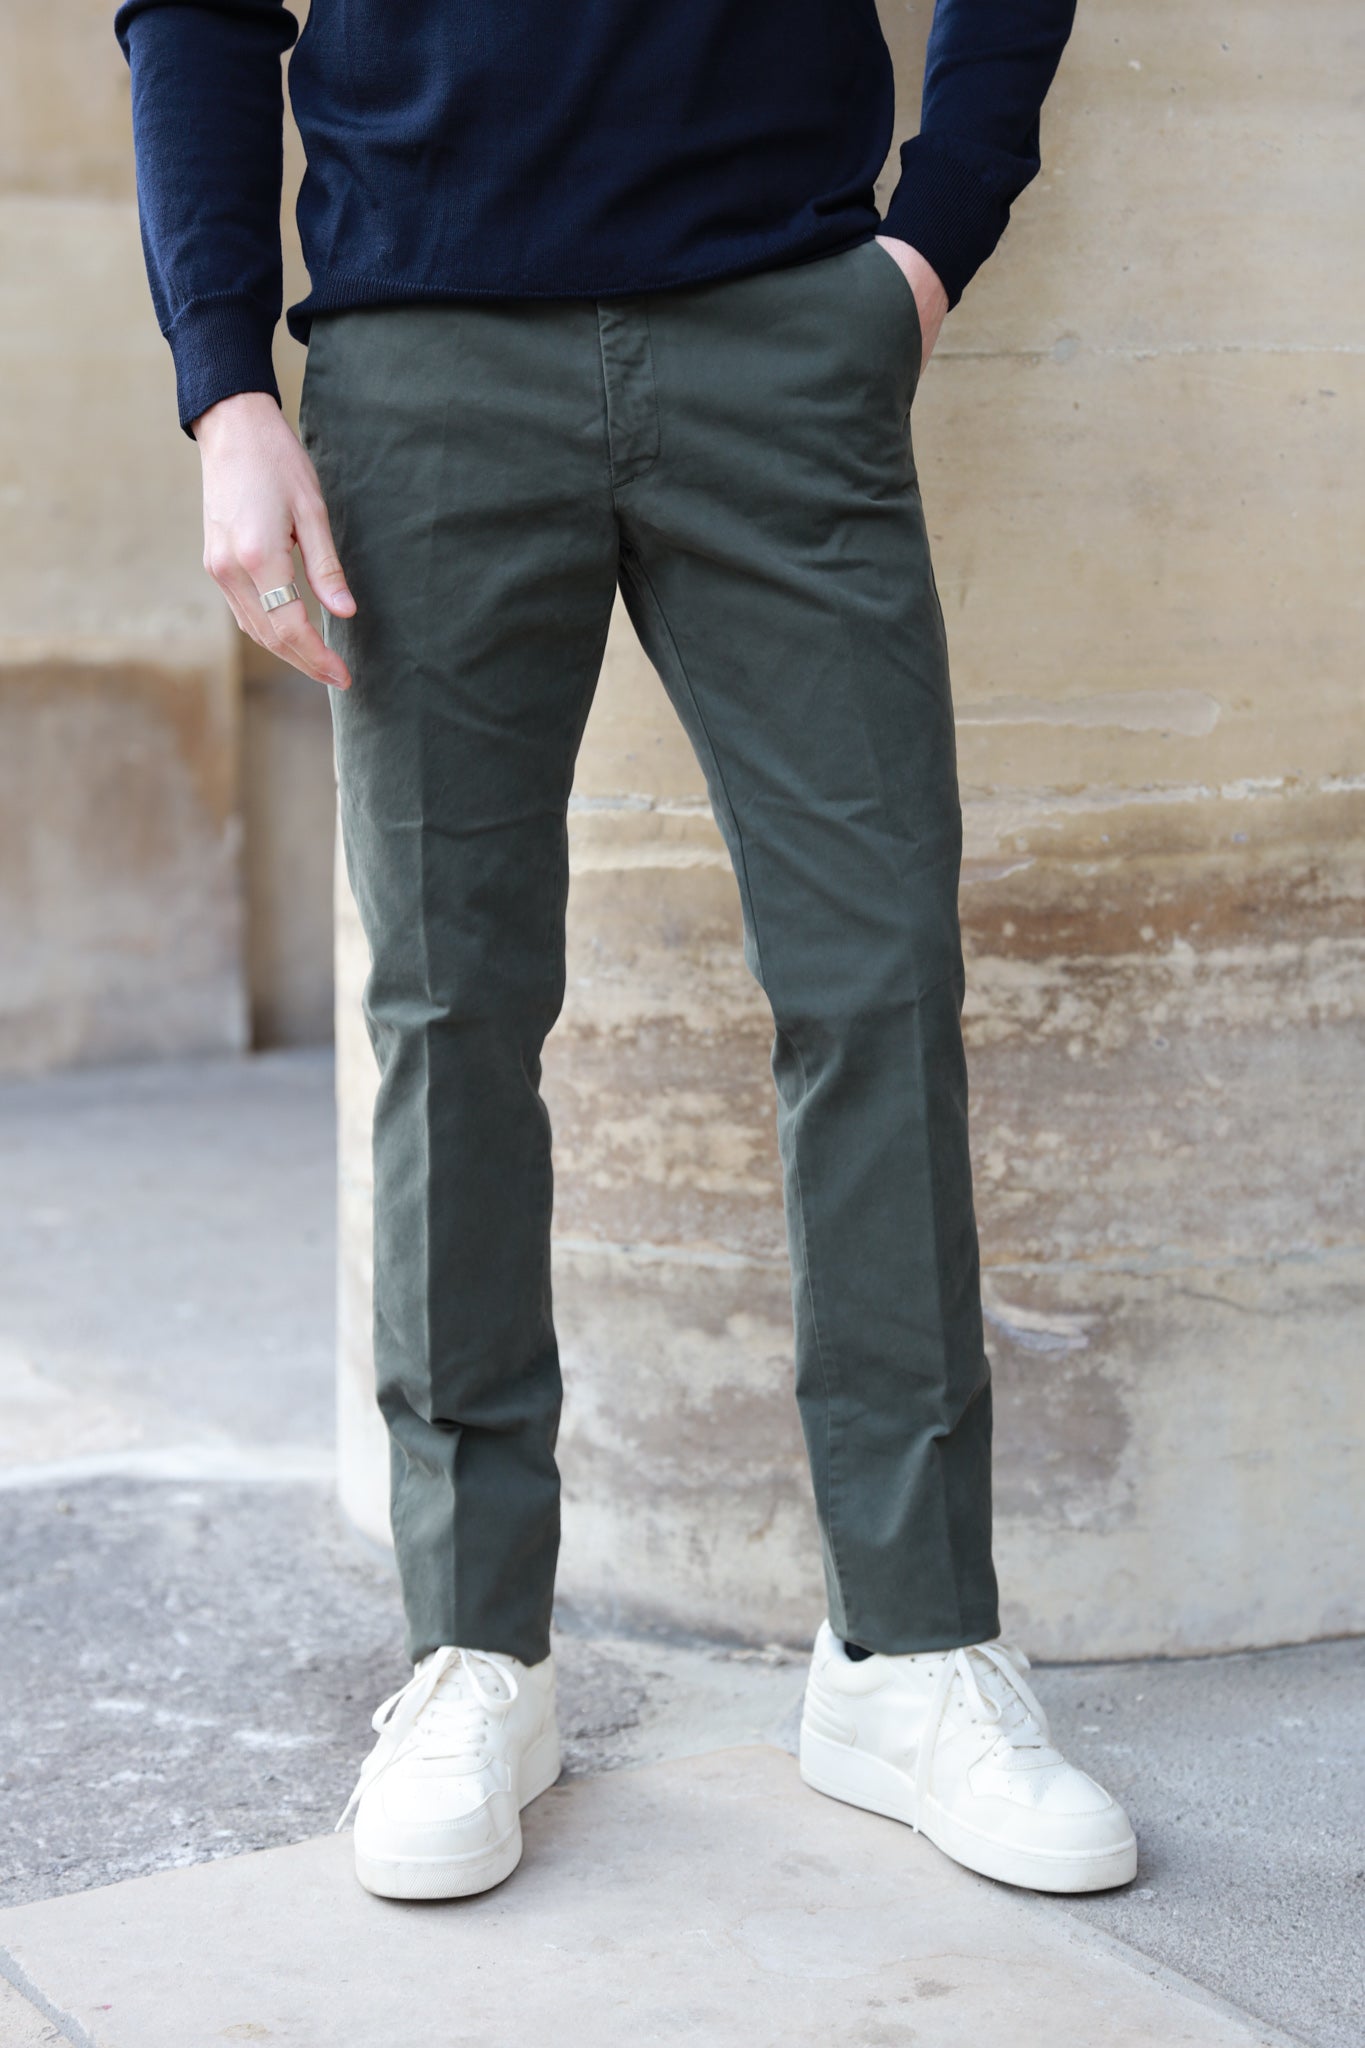 Men's Curling pants in khaki winter cotton drill made in France